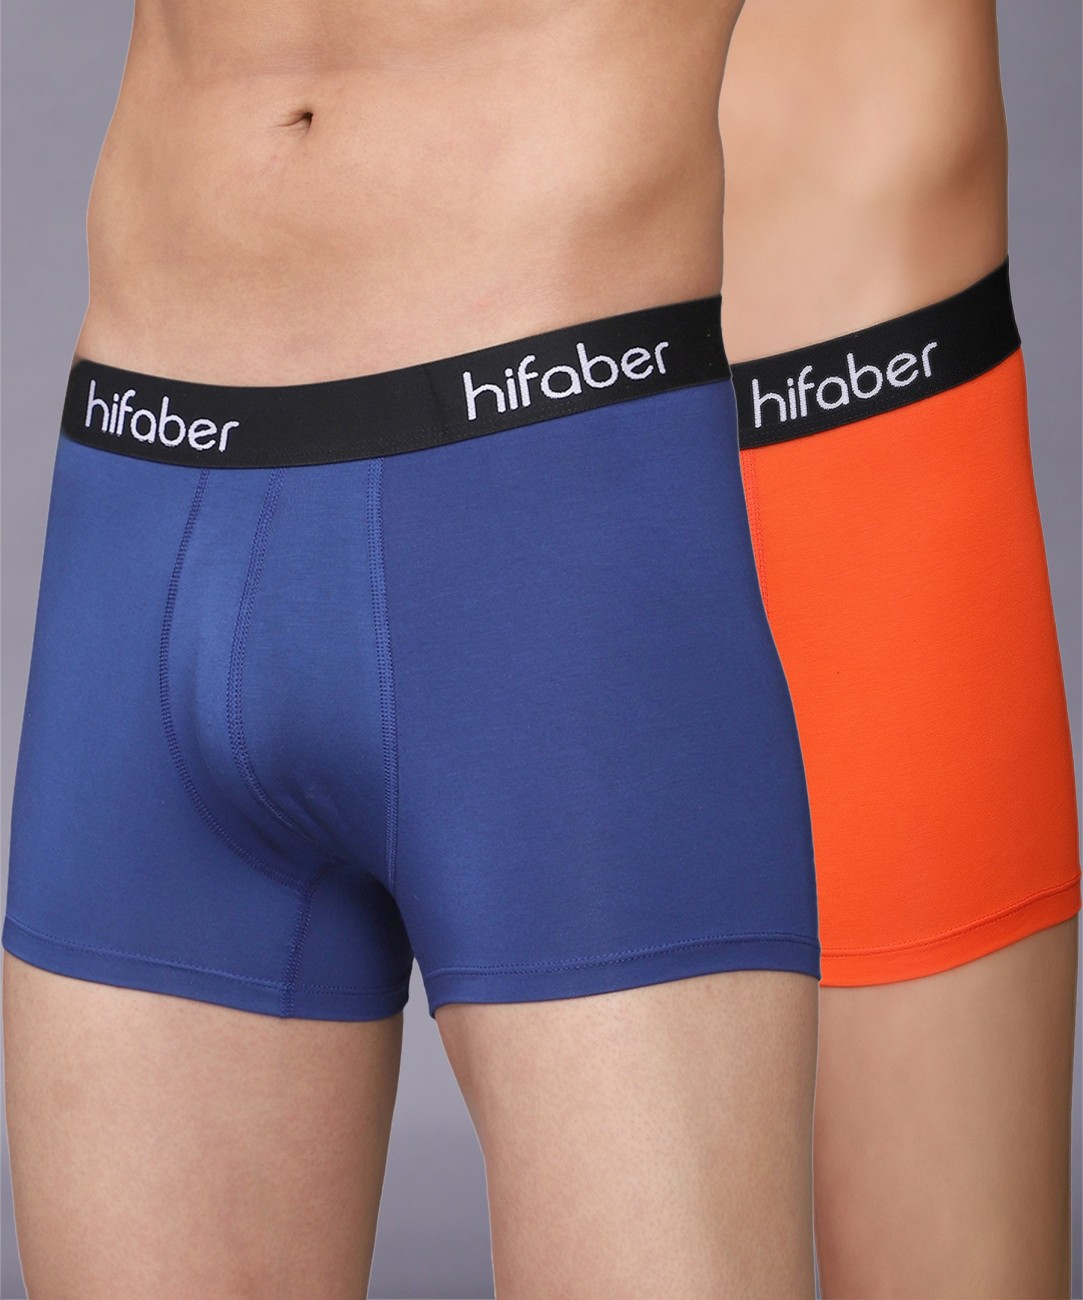 Buy HIFABER Pack of 3 Men HighlySoft Antimicrobial Modal Duet